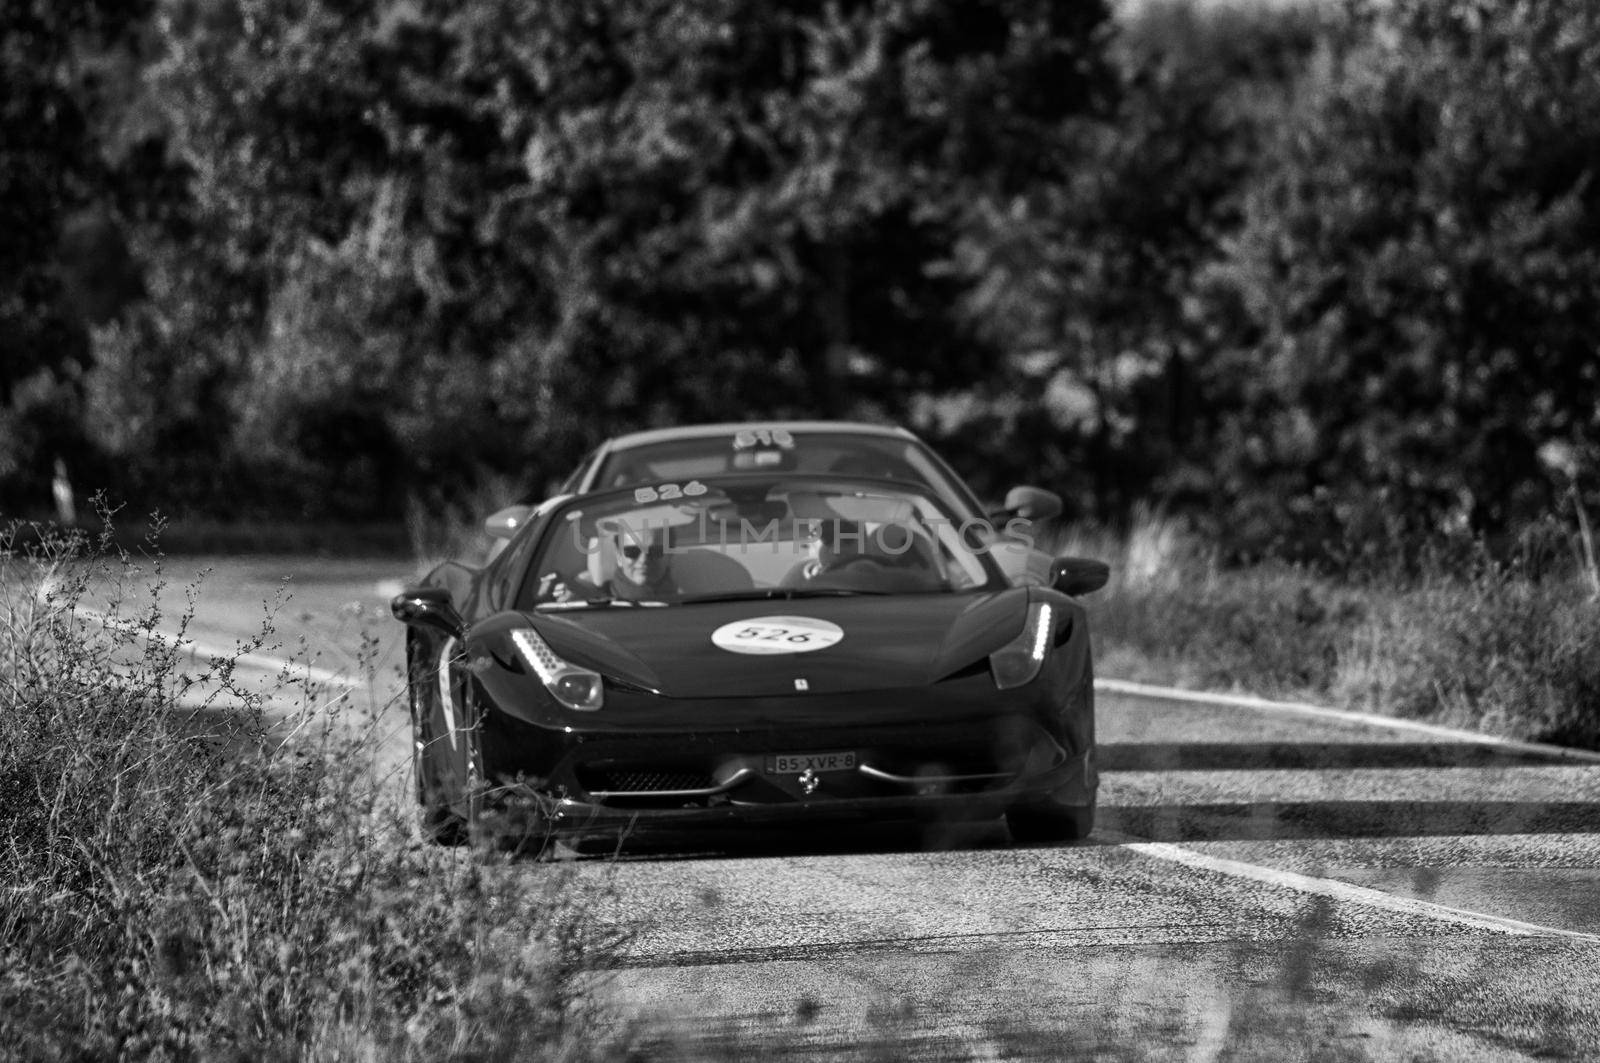 FERRARI 458 SPIDER on an old racing car in rally Mille Miglia 2020 the famous italian historical race (1927-1957) by massimocampanari